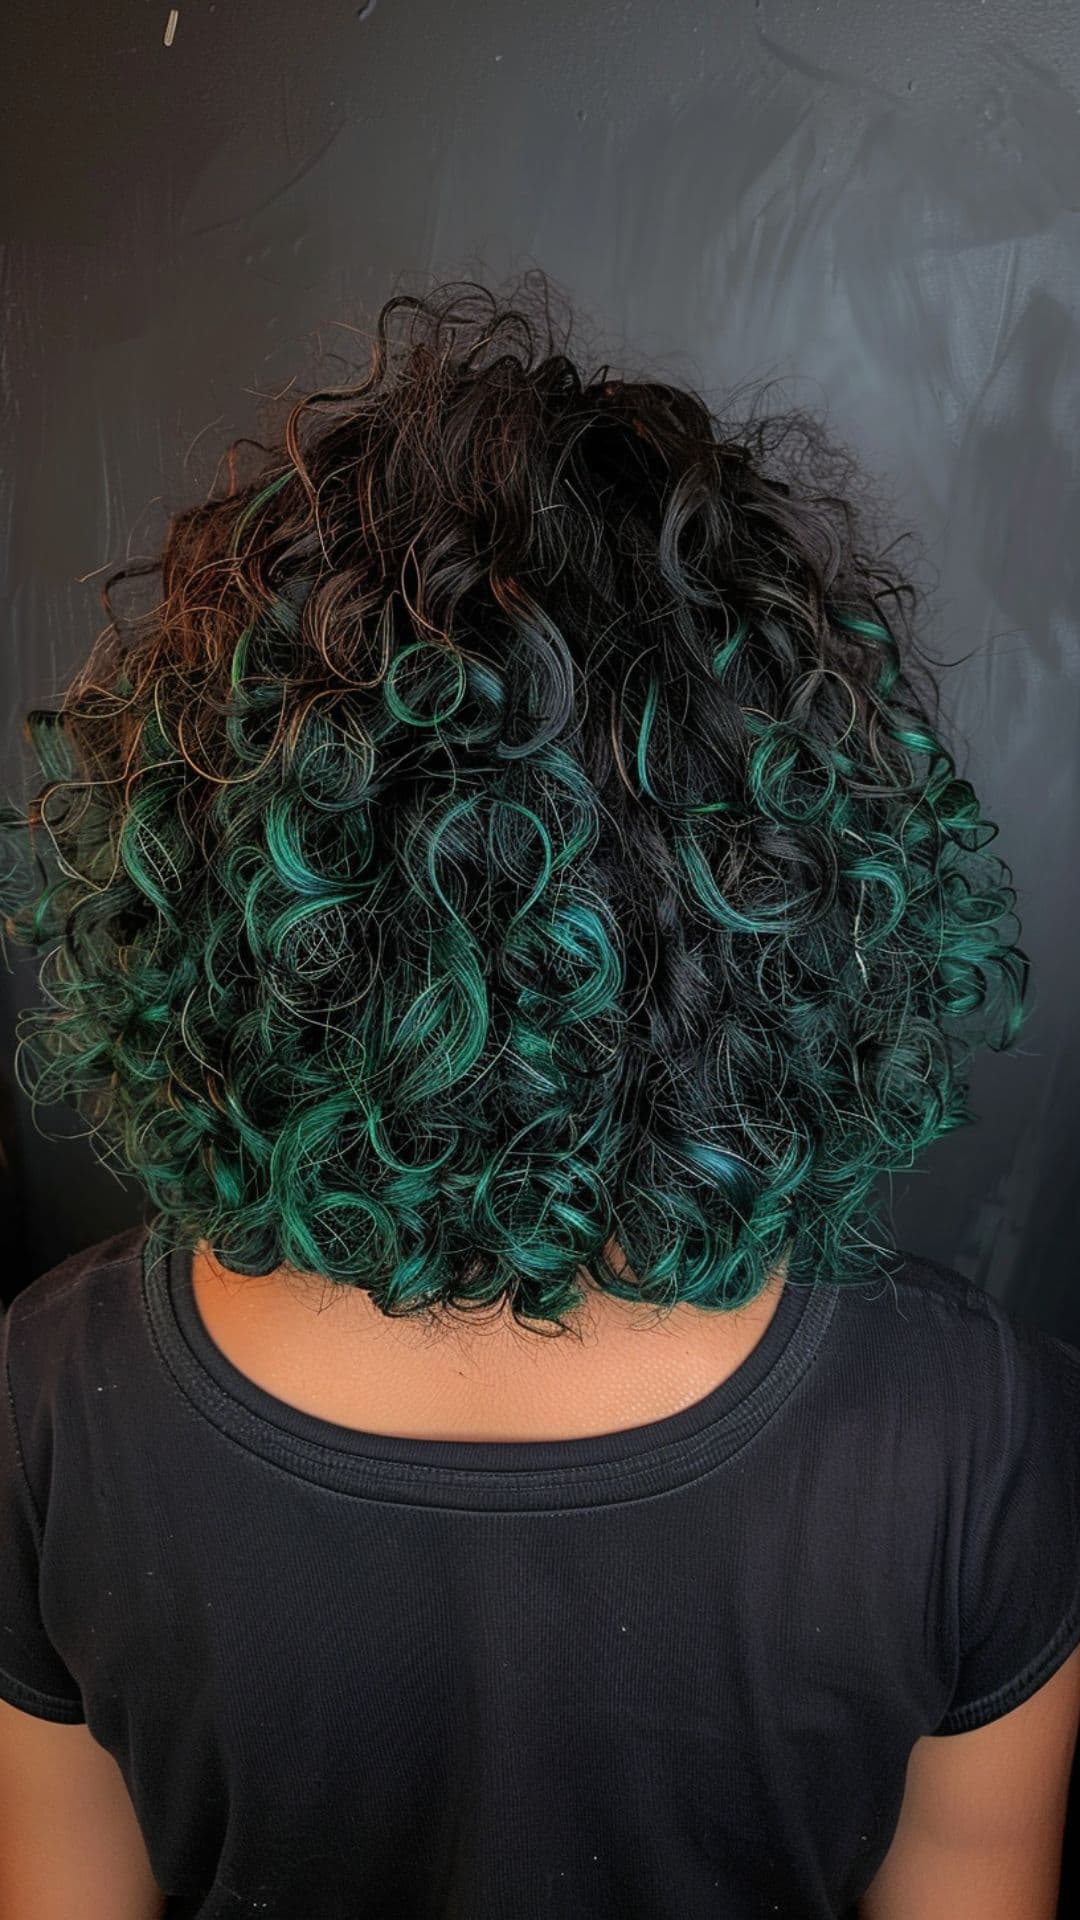 A woman modelling a curly hair with green highlights.